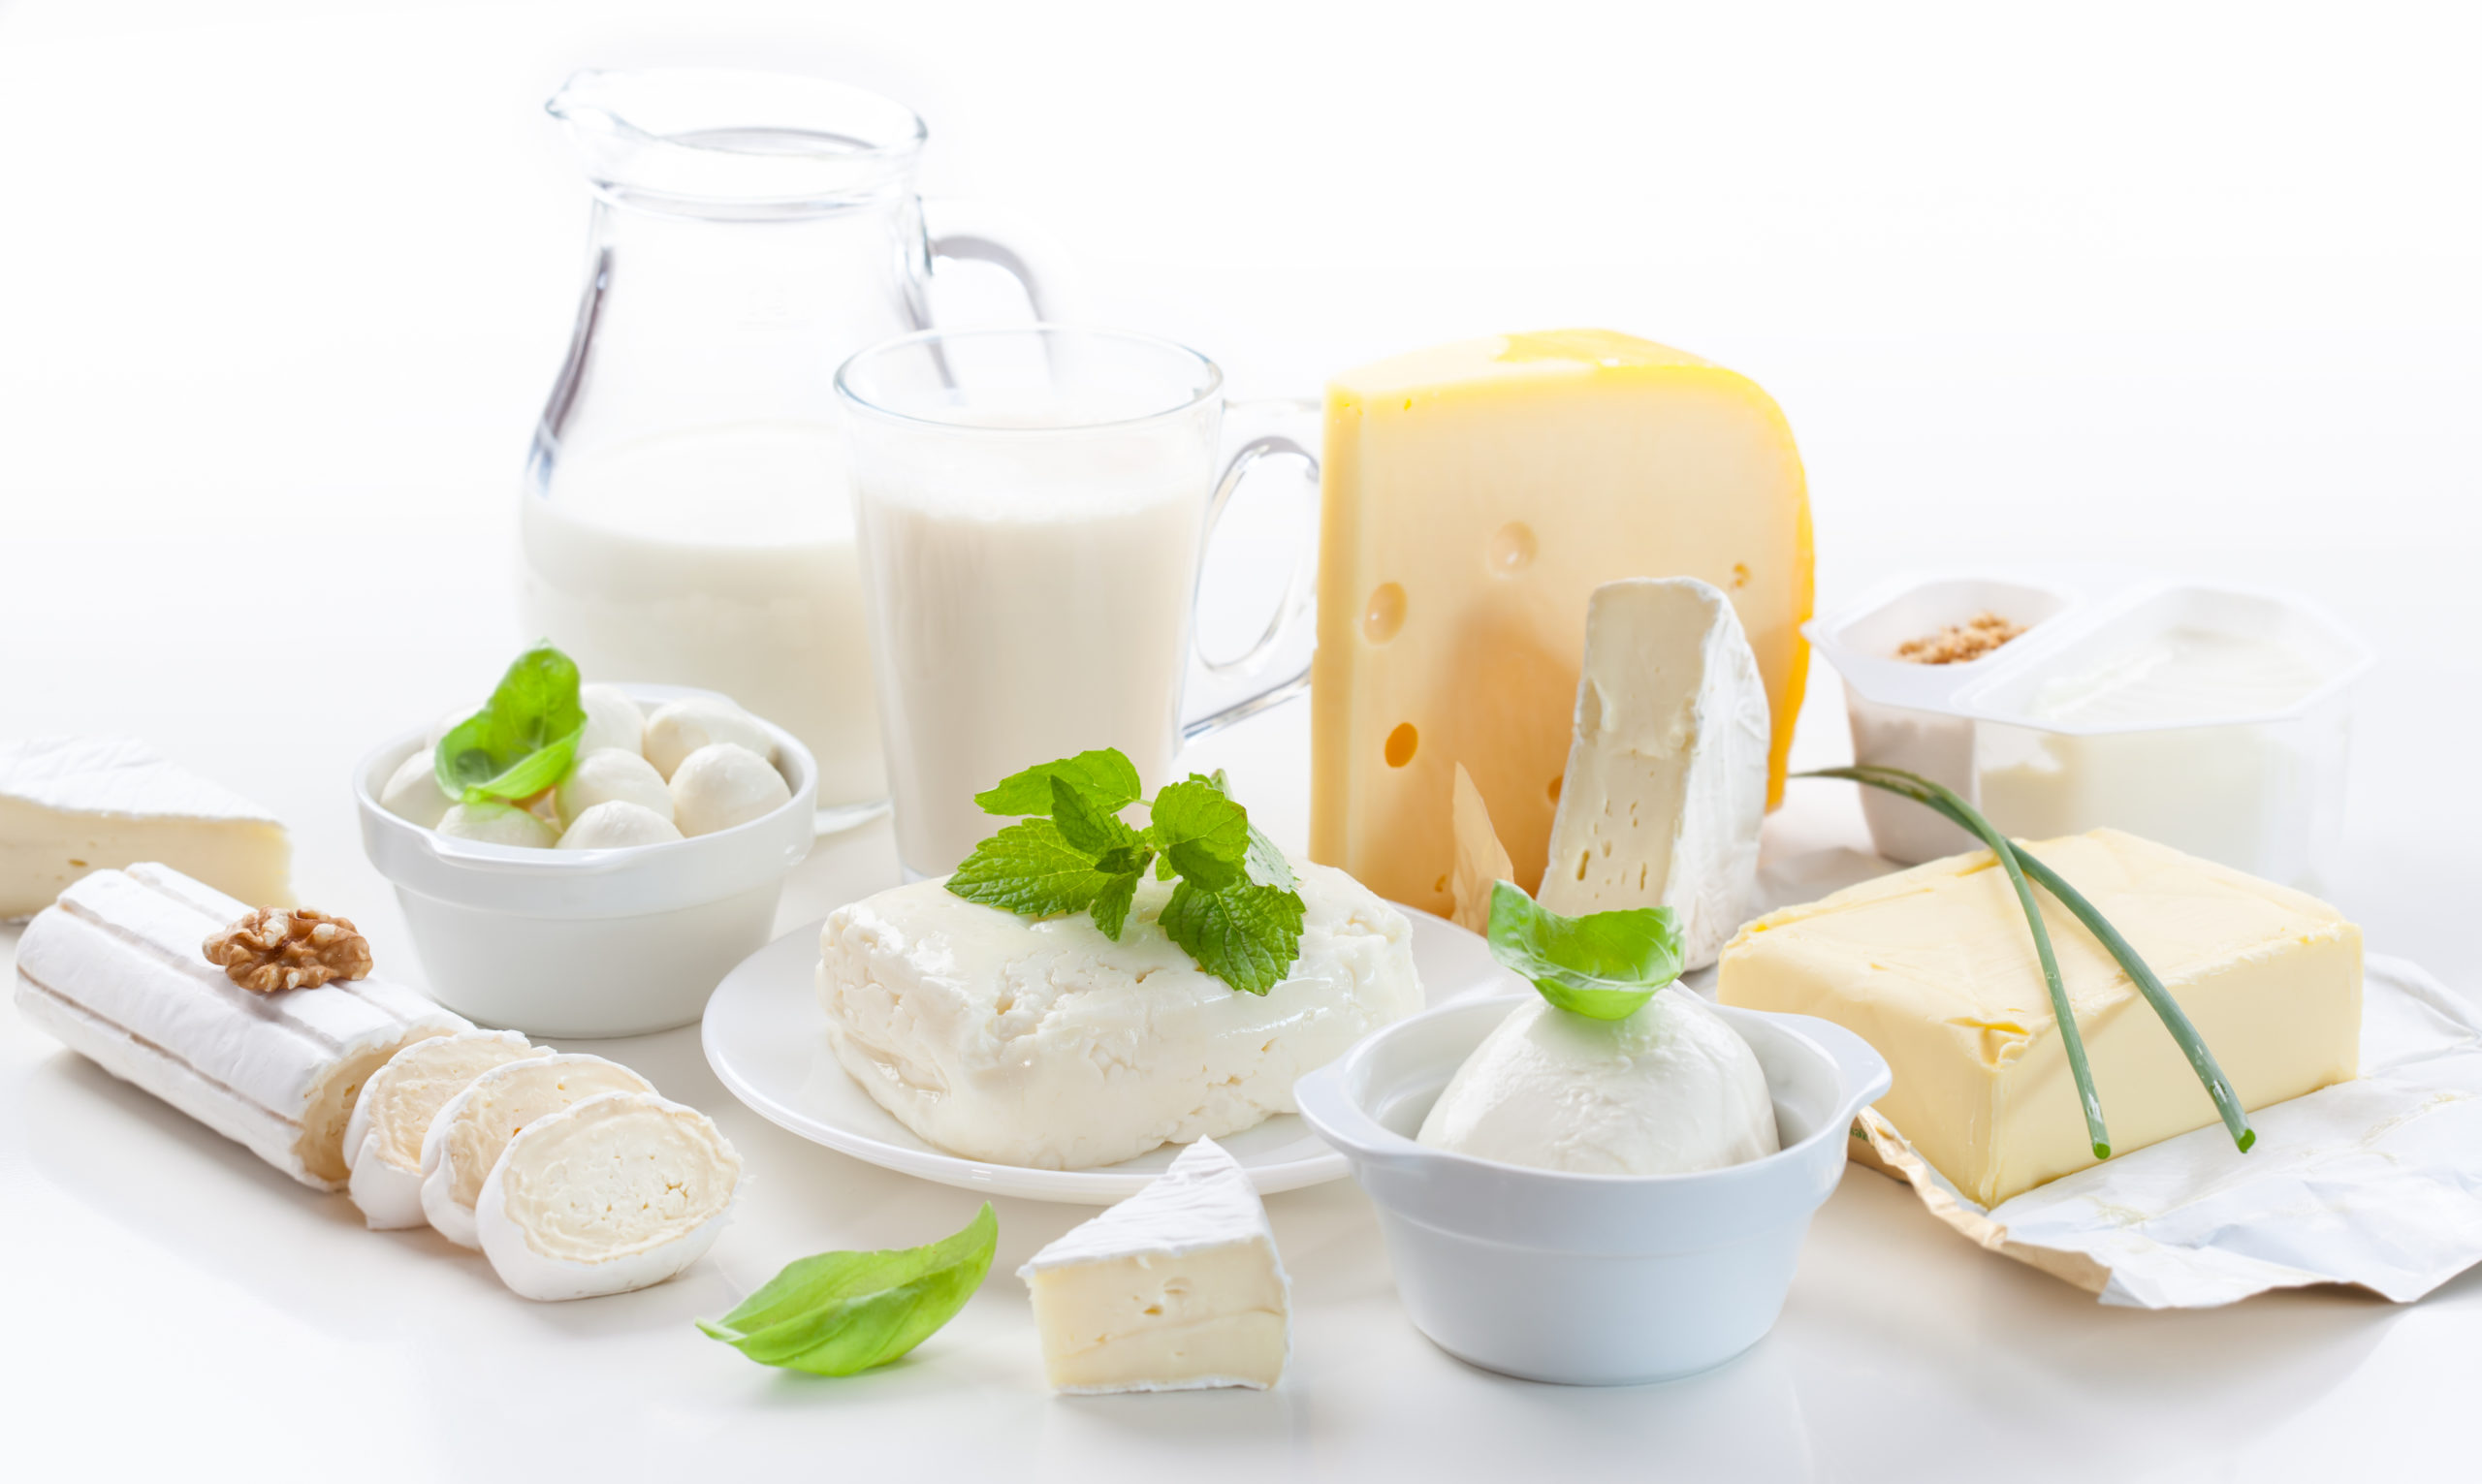 dairy products can help strengthen your teeth